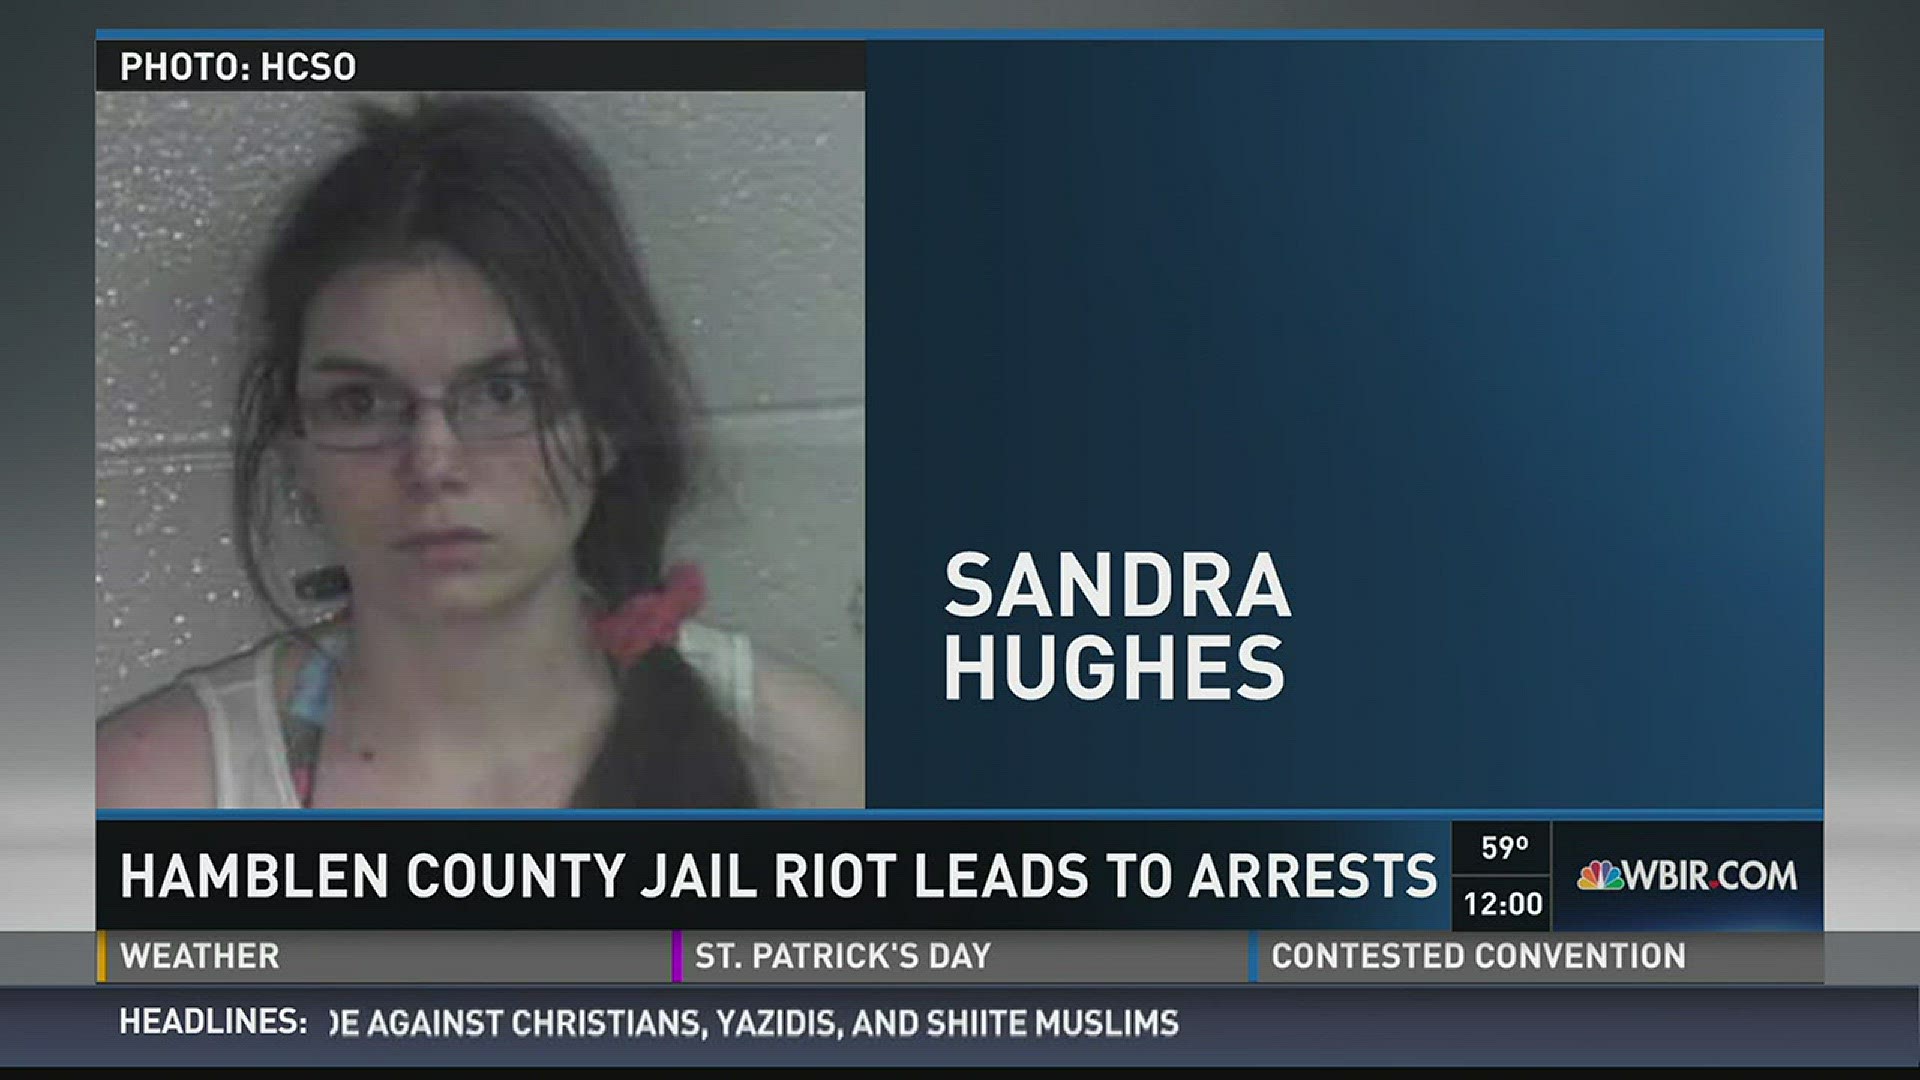 A Hamblen County mother is charged with child abuse after an escaped jail inmate was found in her home.